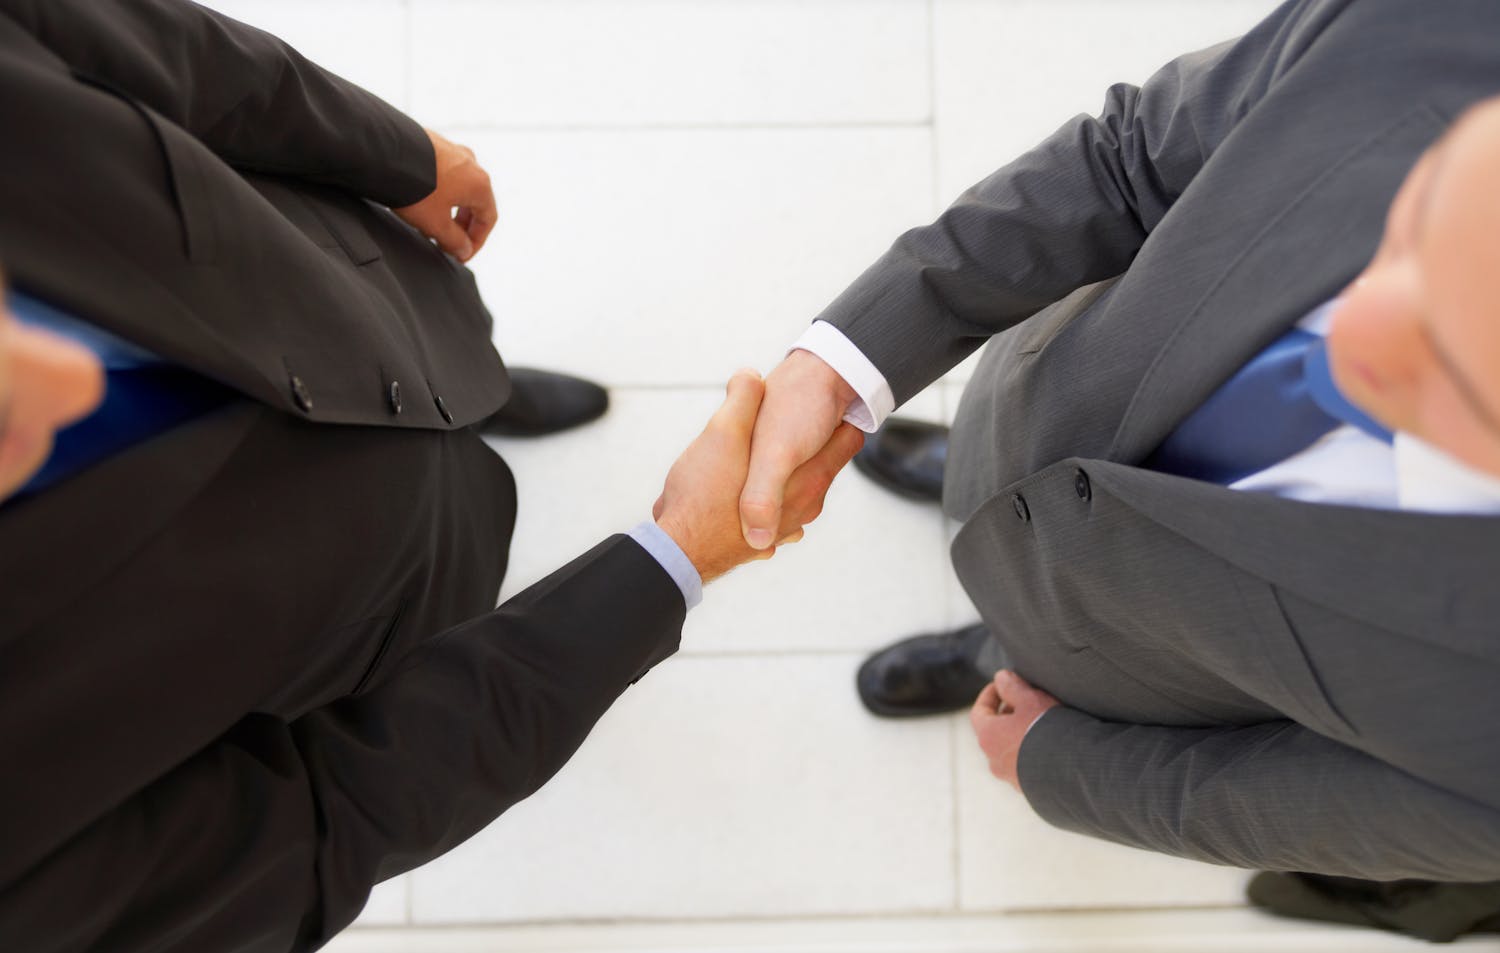 Two men in business suits shaking hands